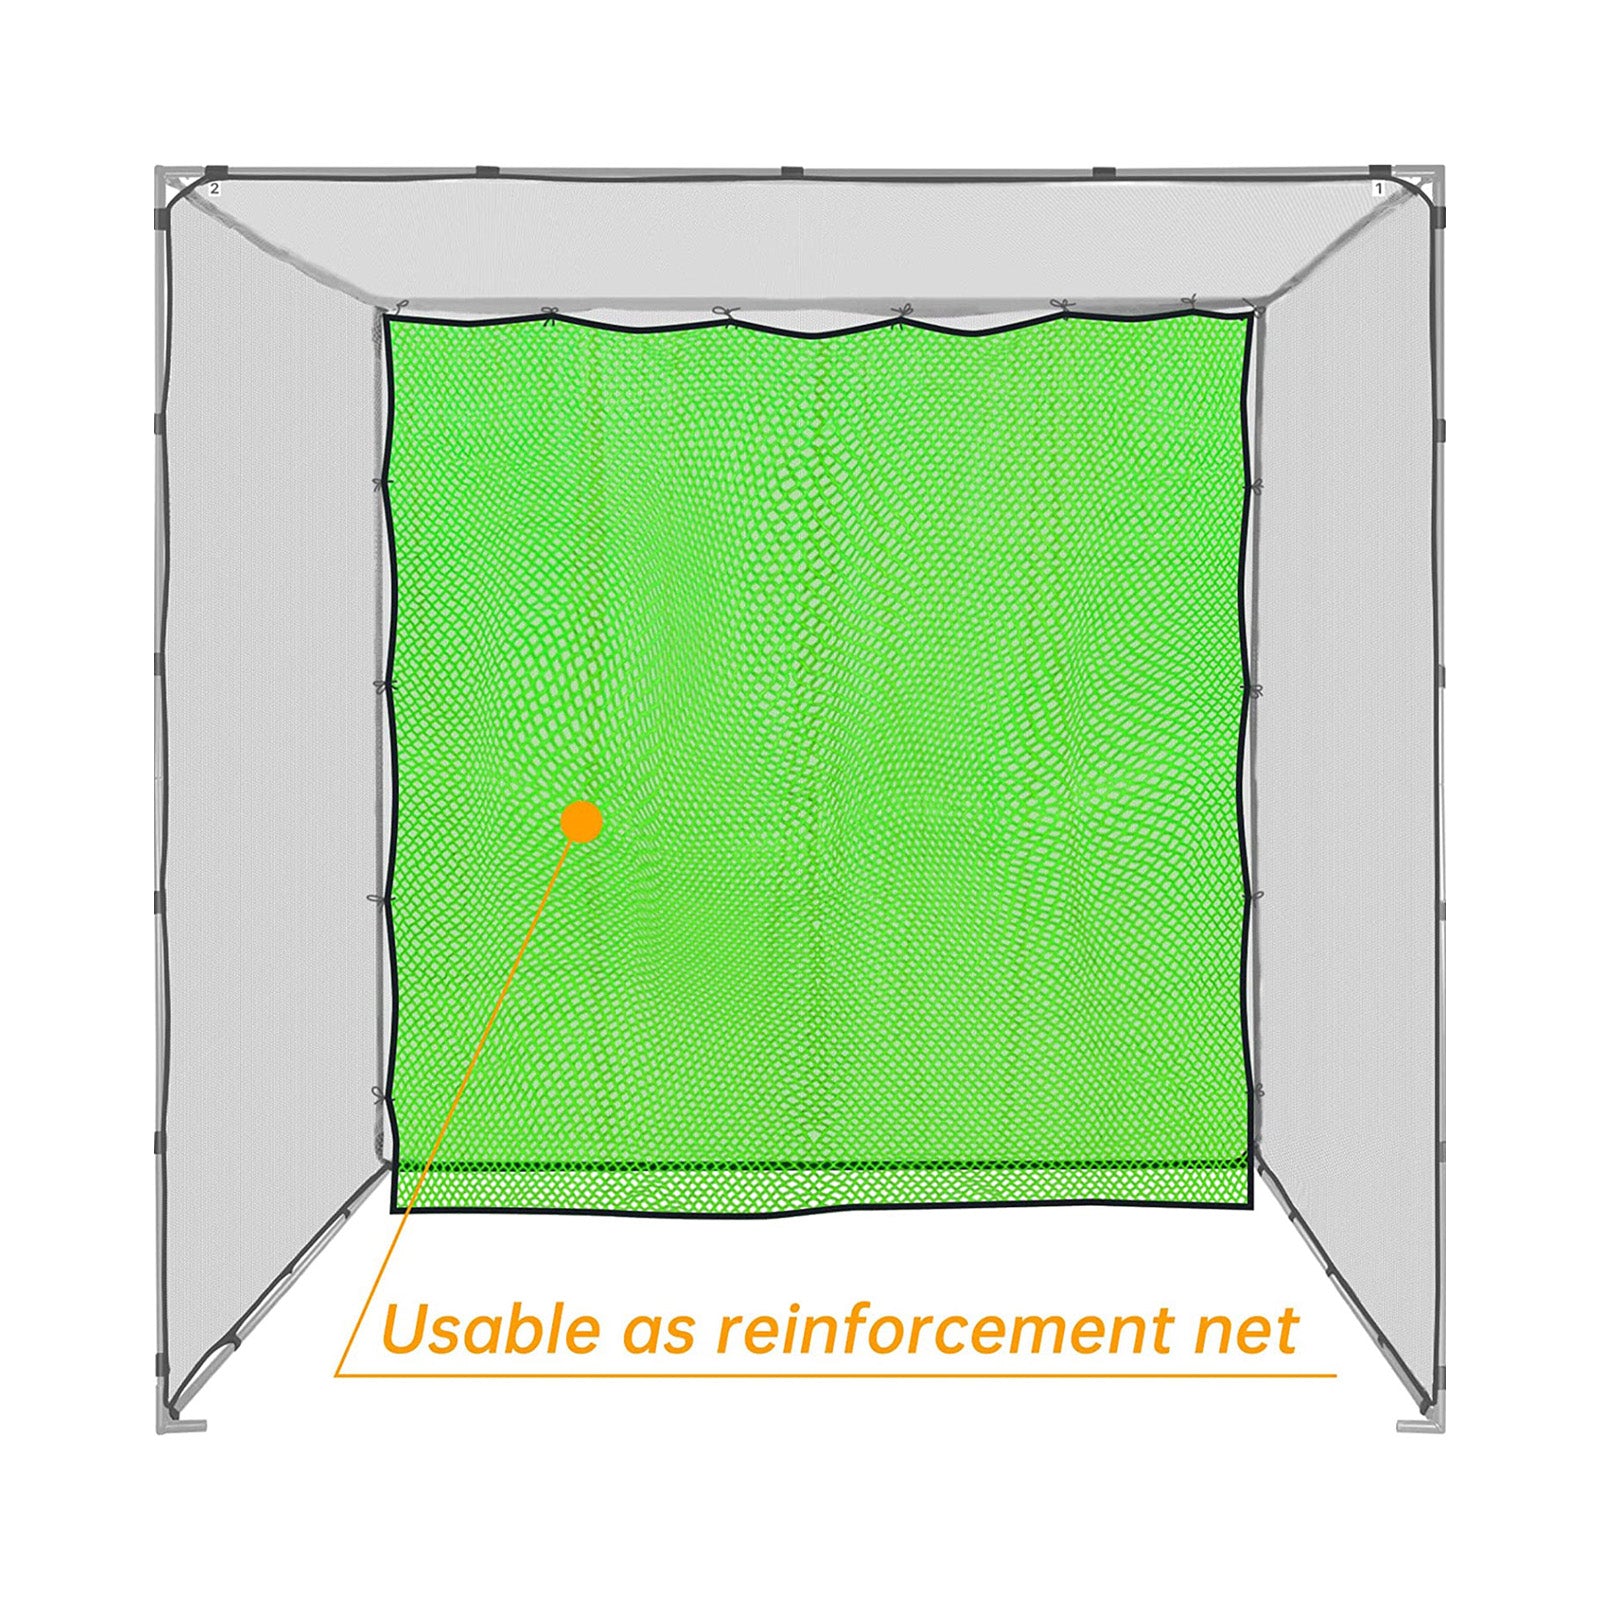 10x20 Galileo Golf Cage Replacement Net Piece/Good resilience